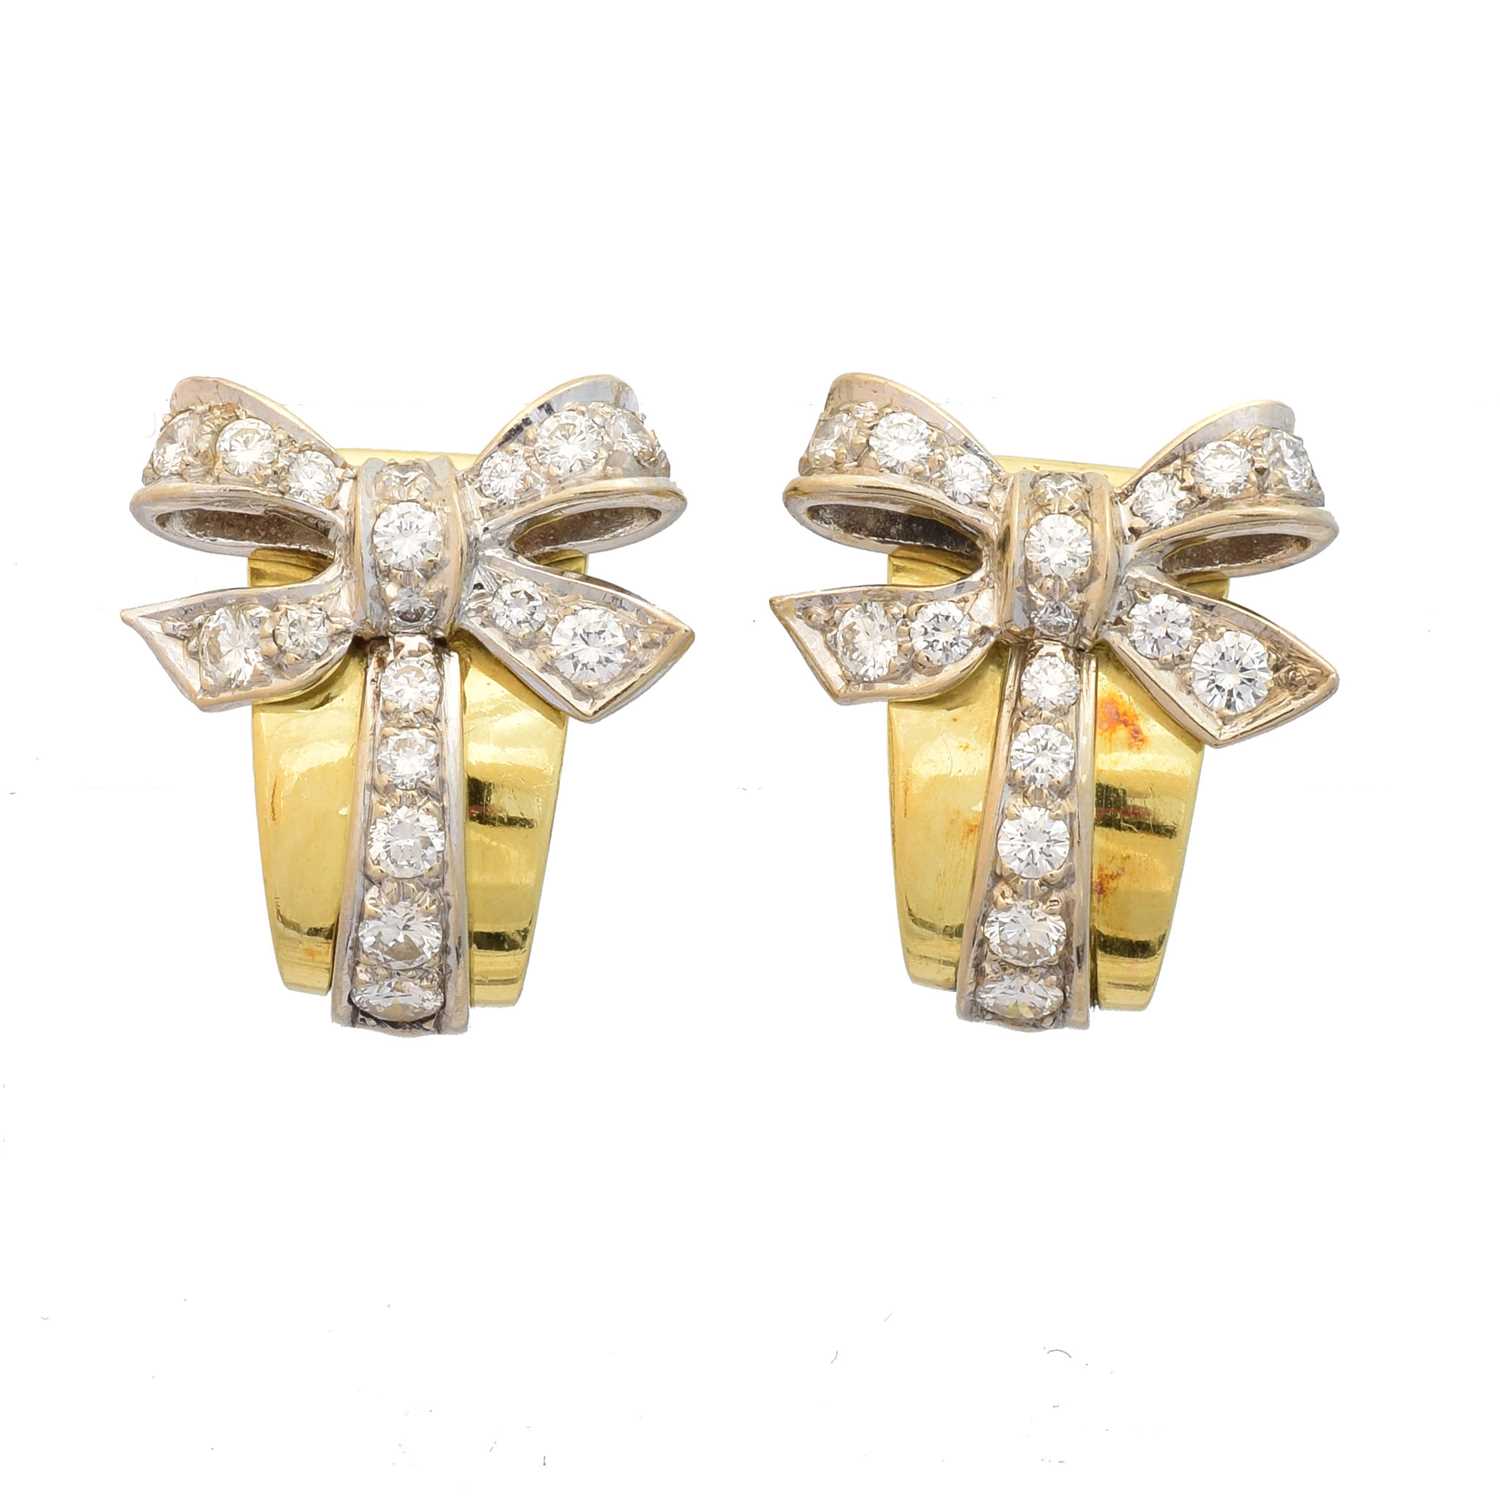 Lot A pair of 18ct gold diamond earrings retailed by Boodles